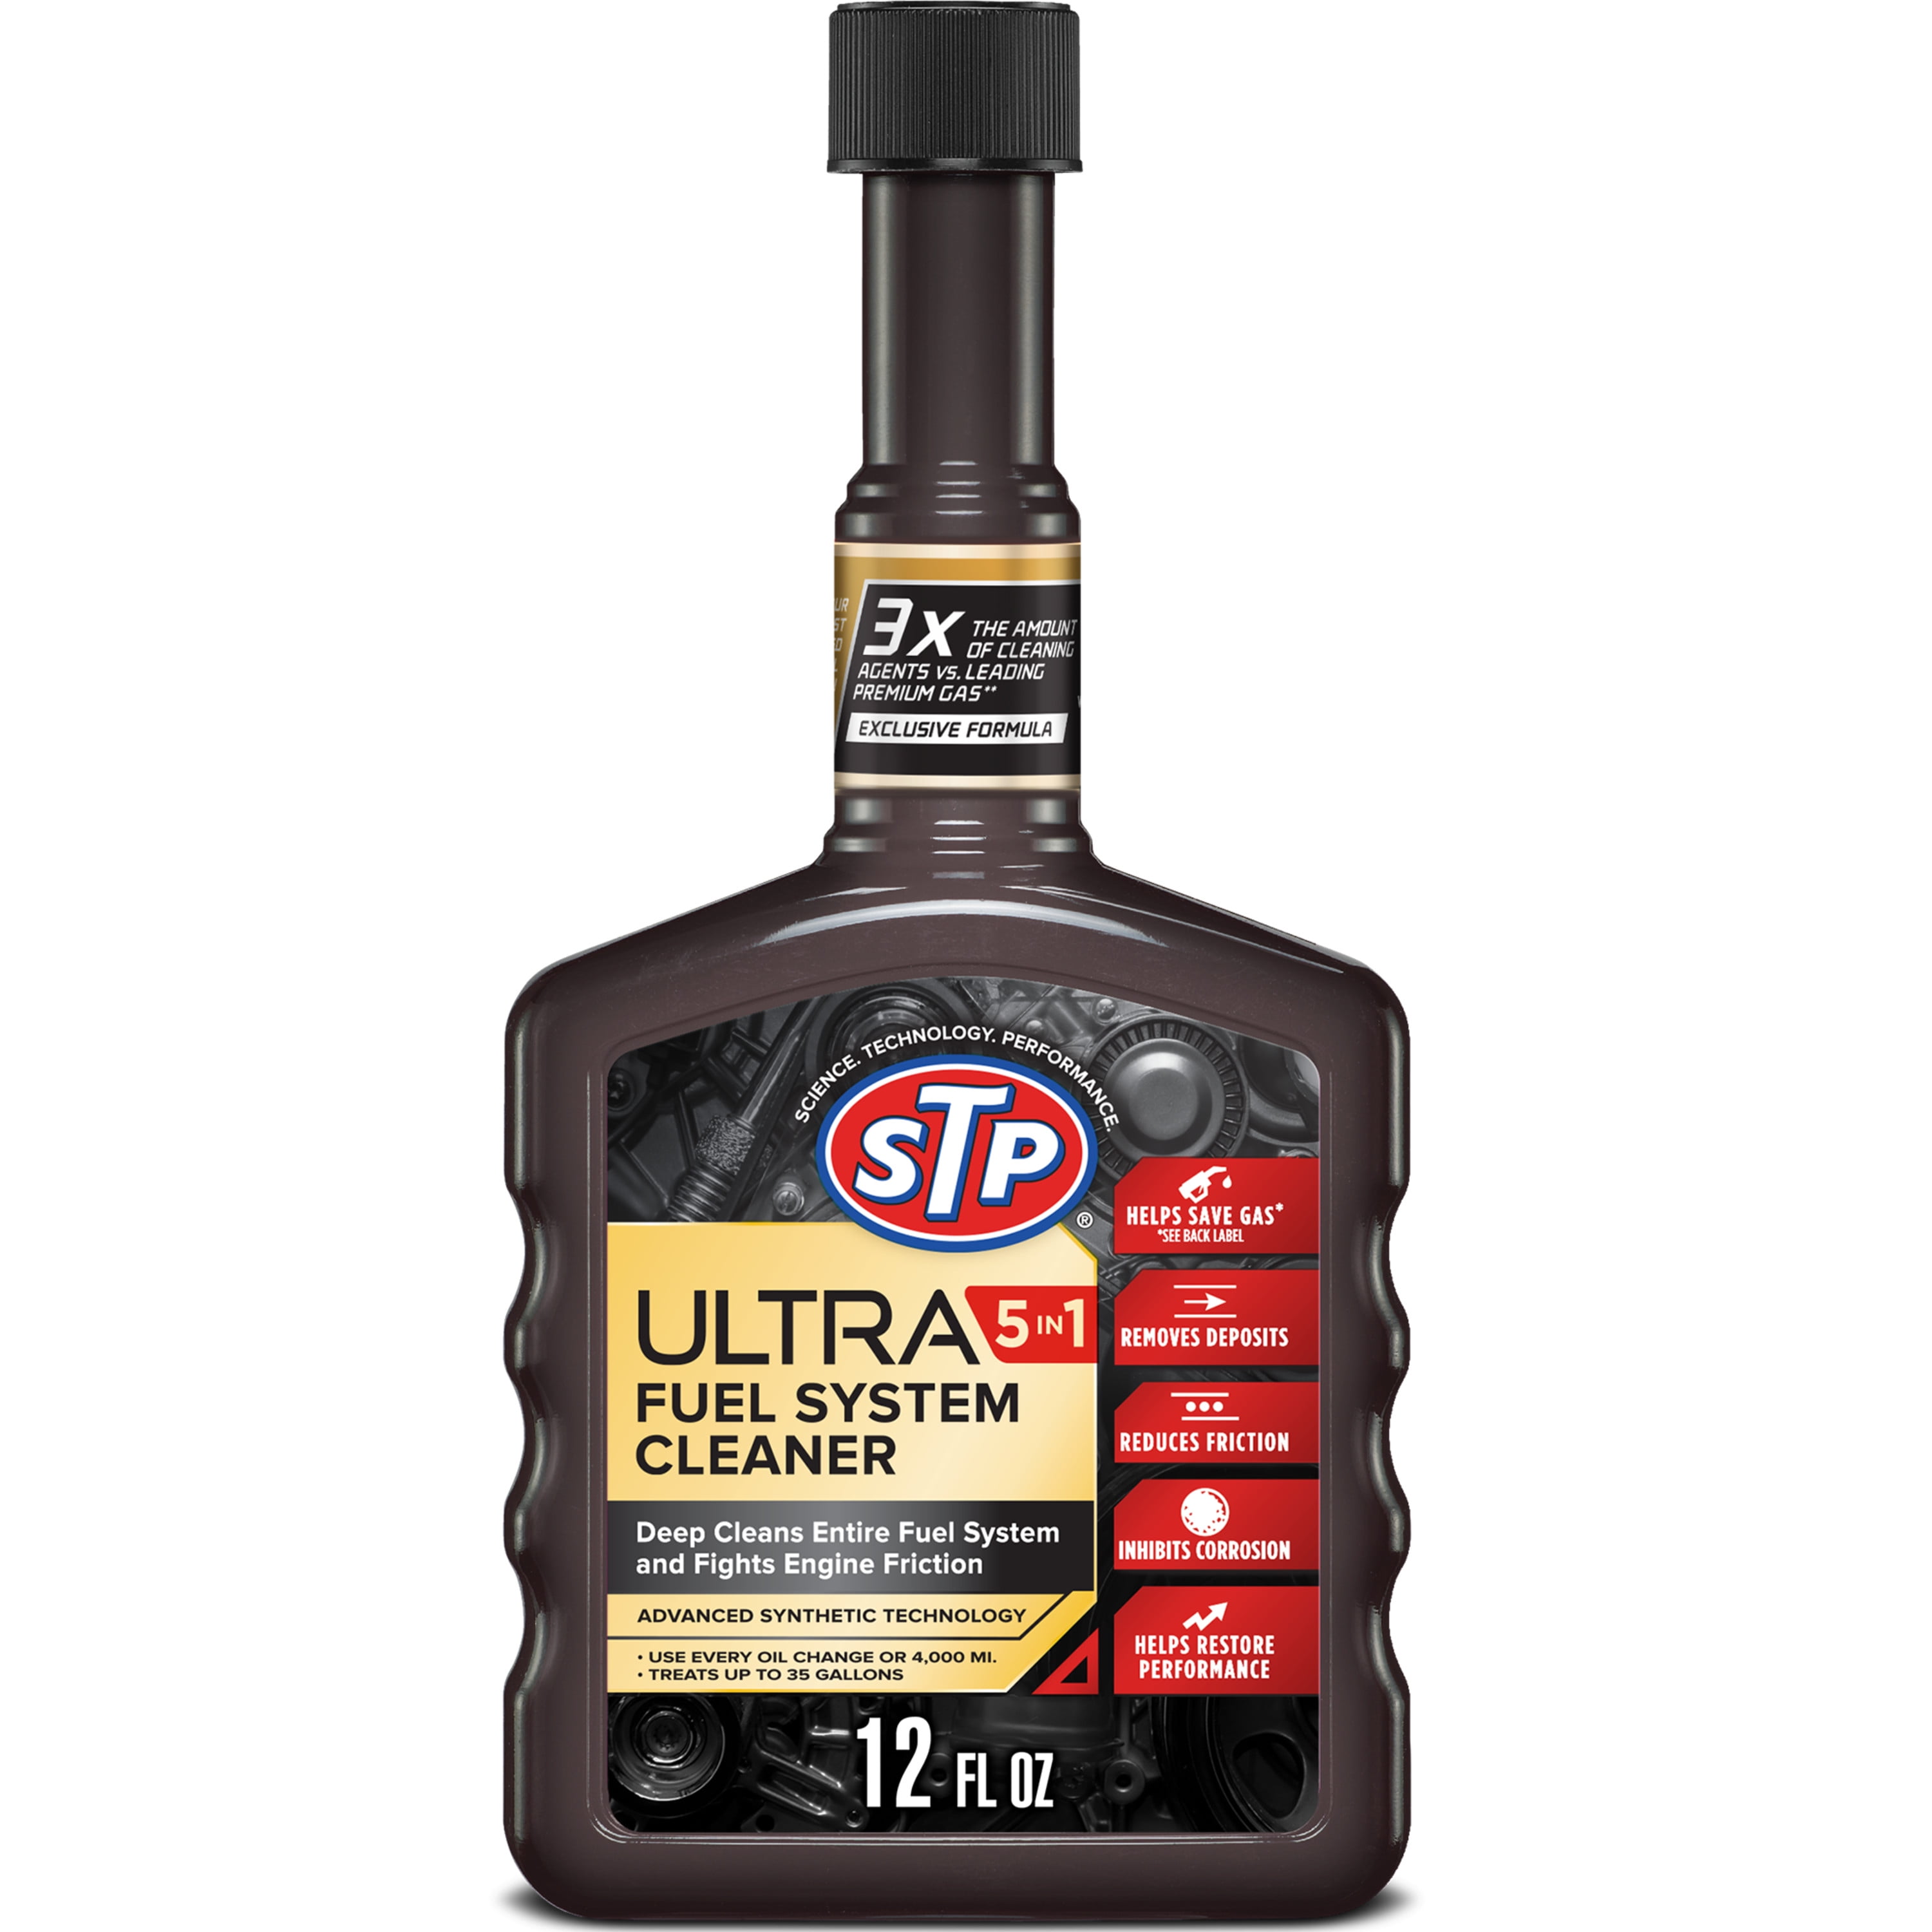 STP Ultra 5-in-1 Fuel System Cleaner  (12 fluid ounces)